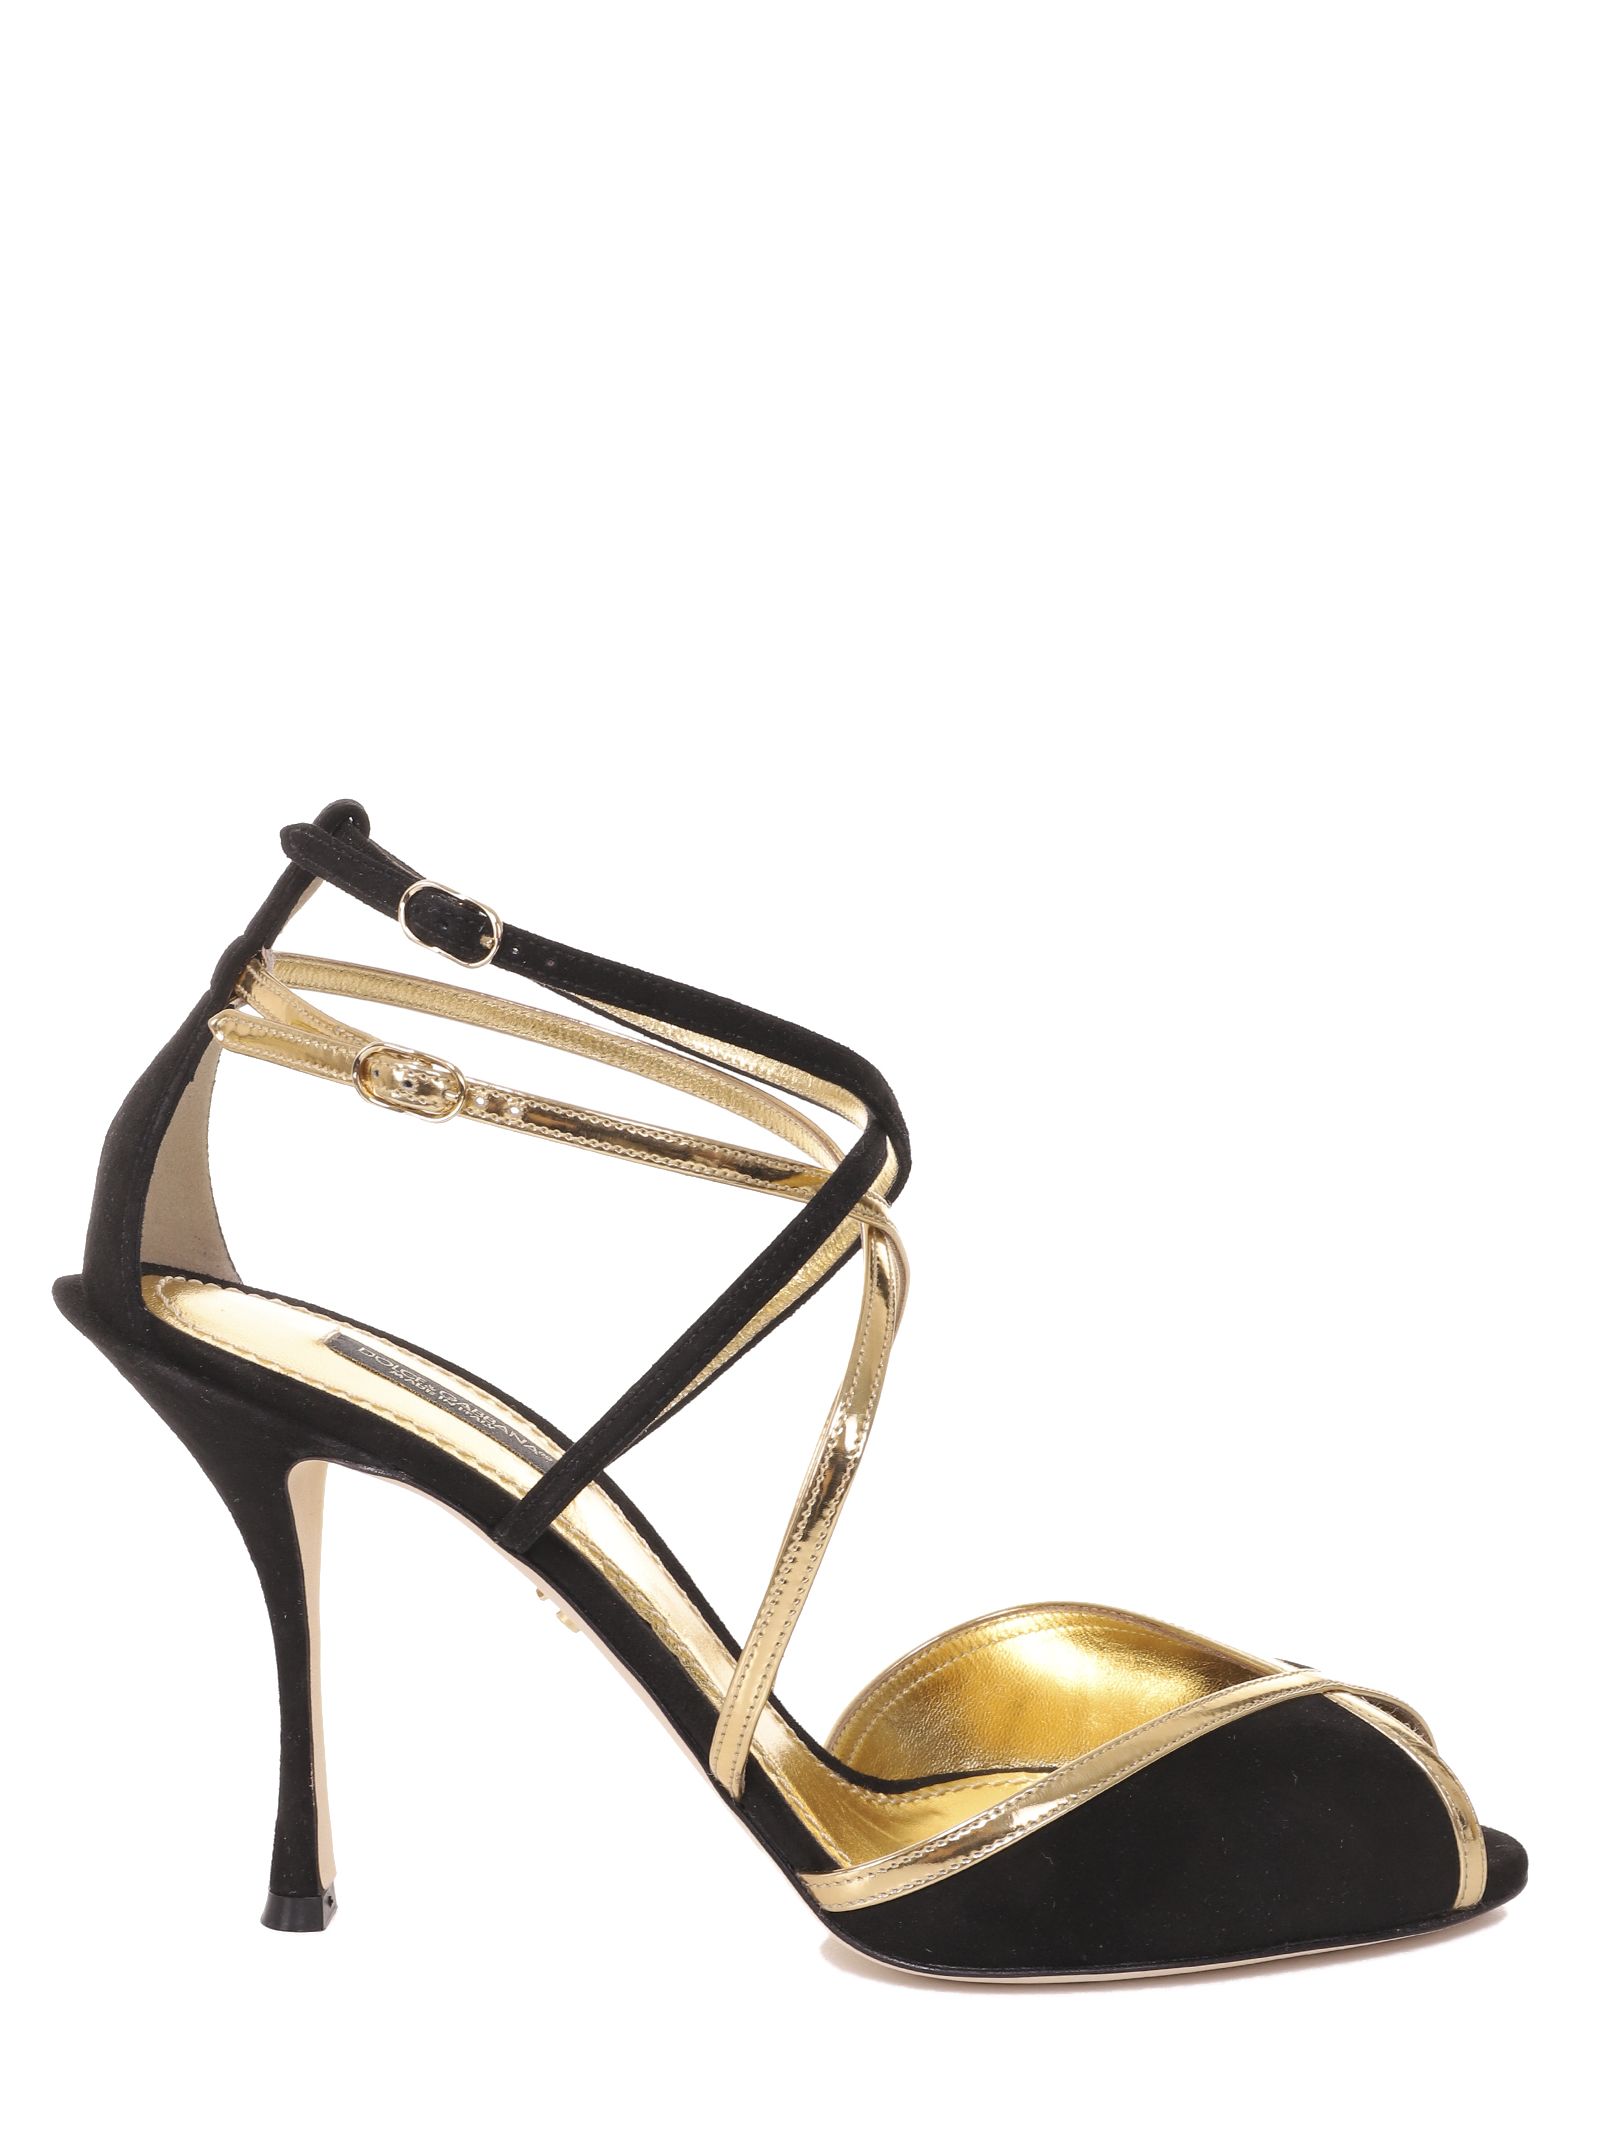 DOLCE & GABBANA BLACK AND GOLD KEIRA SANDALS,10895492